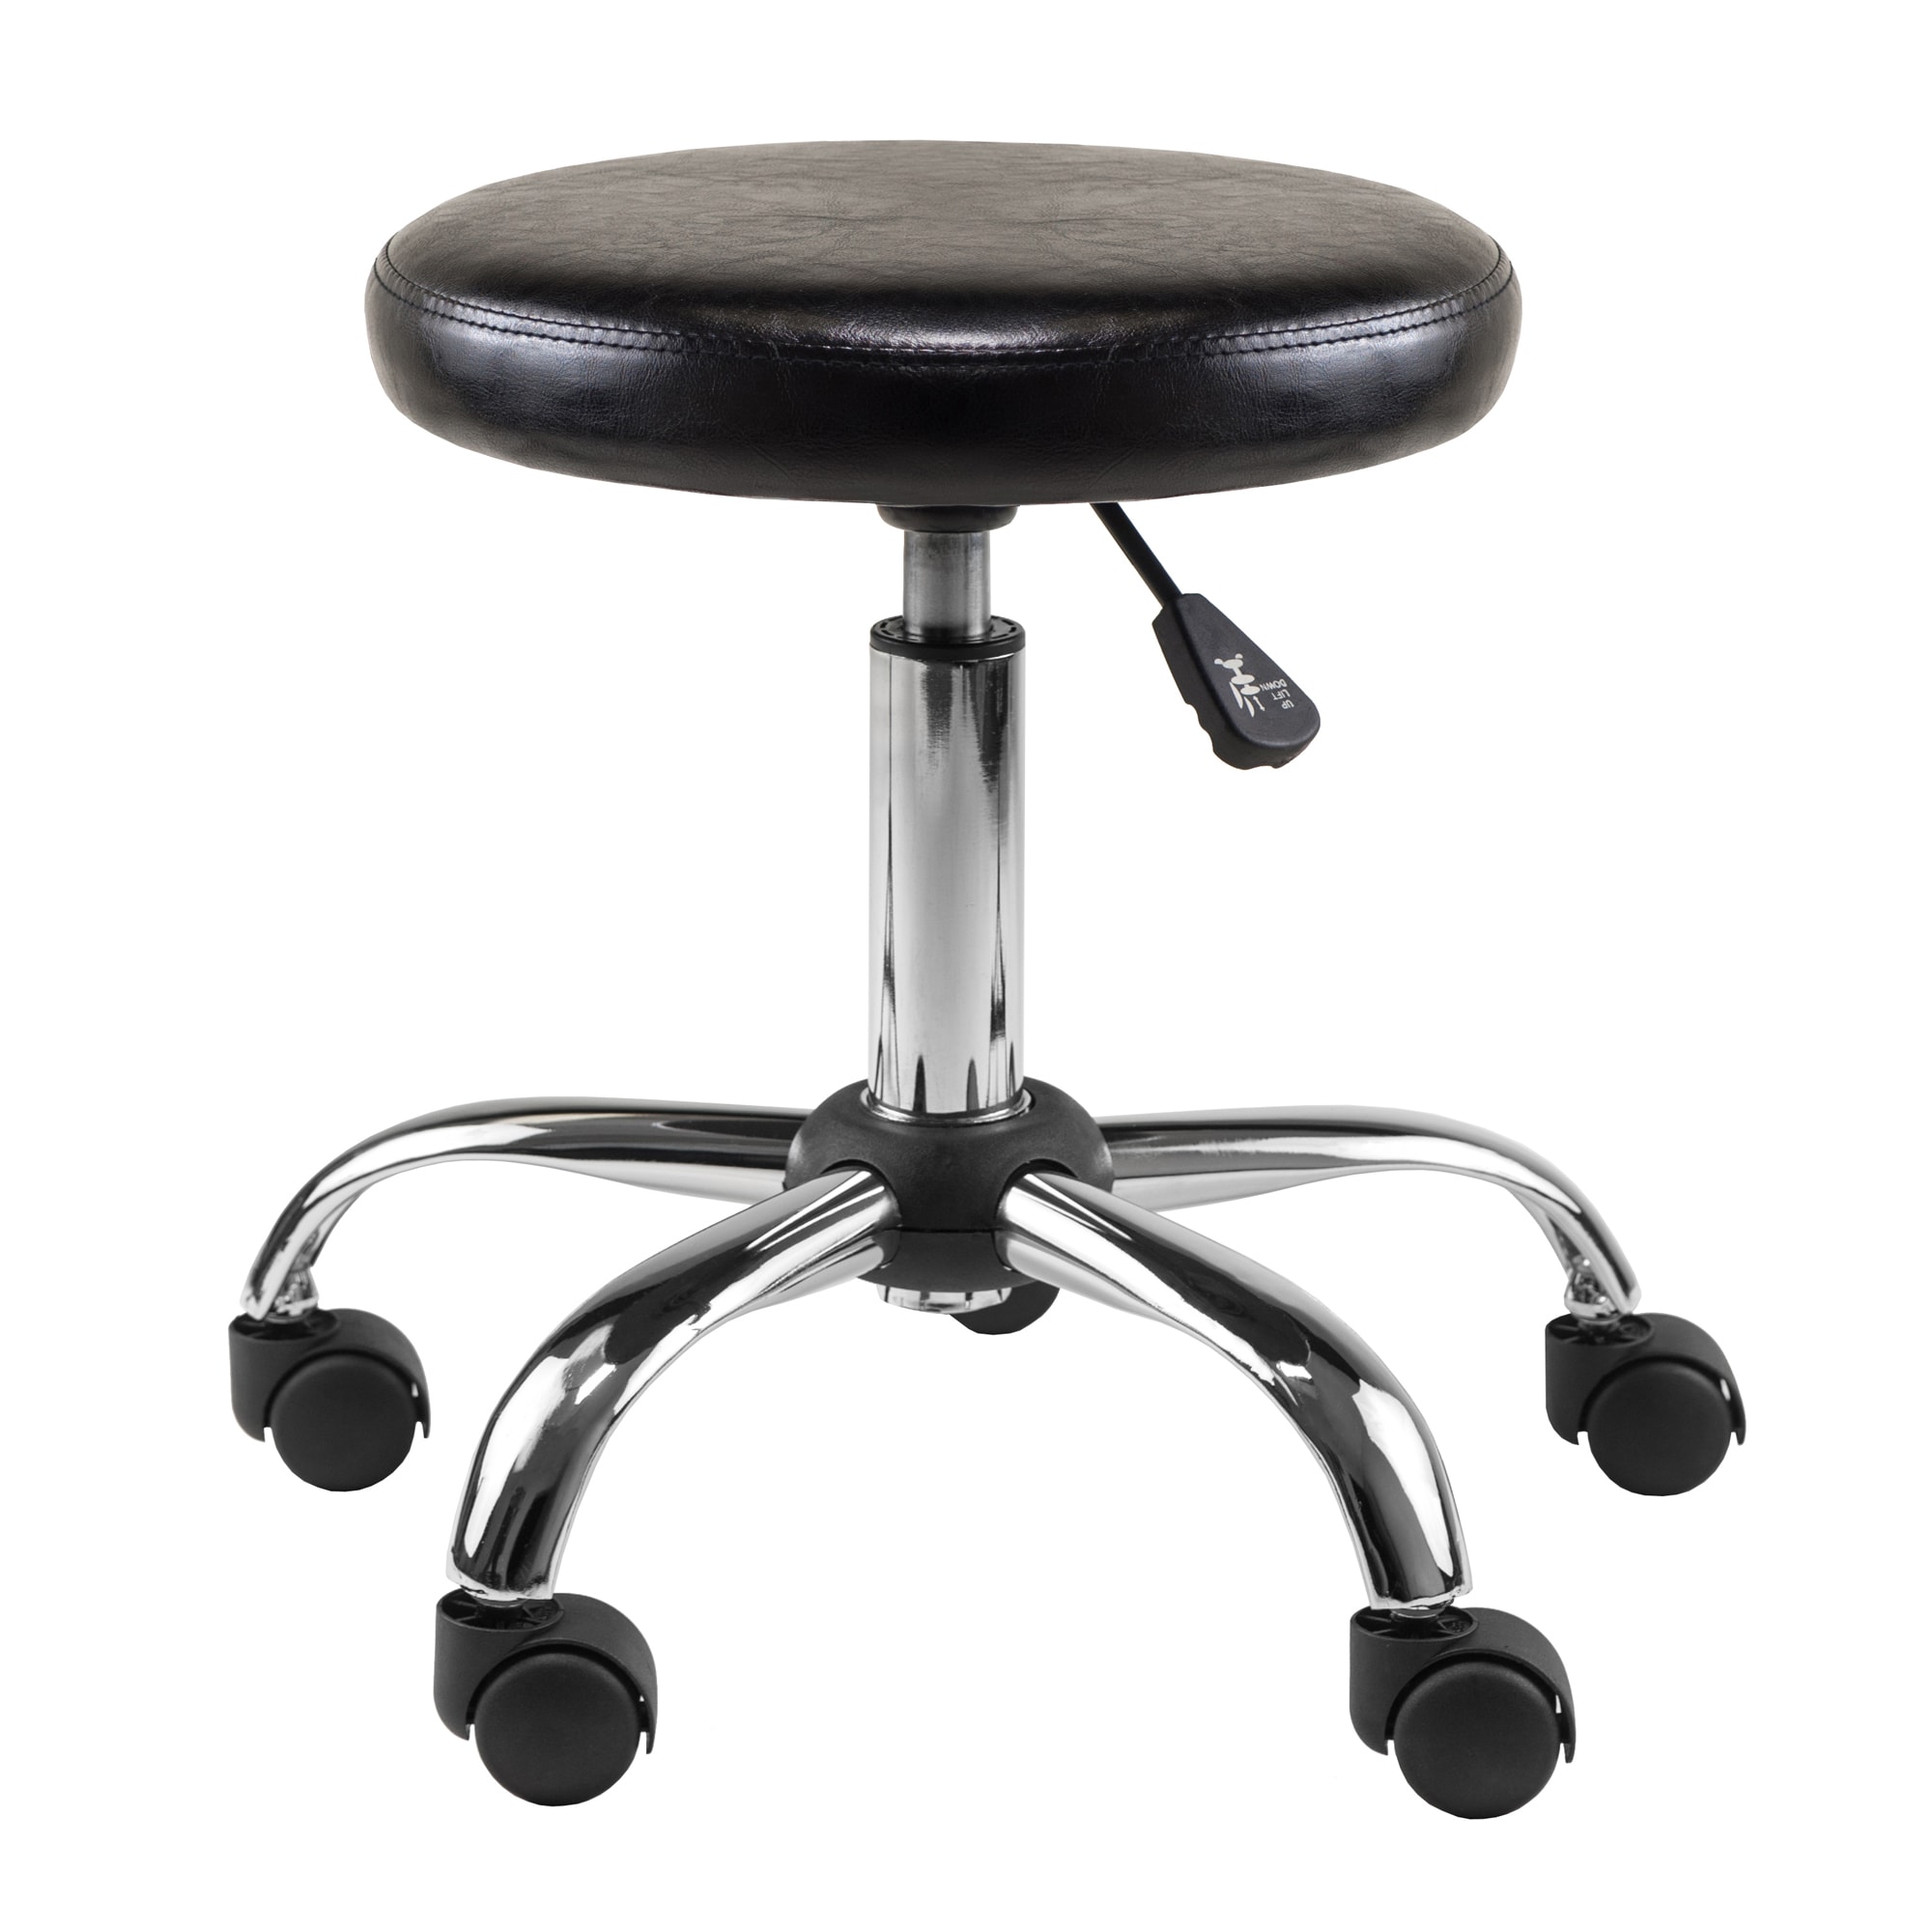 Winsome Wood Paris Set of 2 Airlift Swivel Stool with PU Leather Seat WIN-93232 